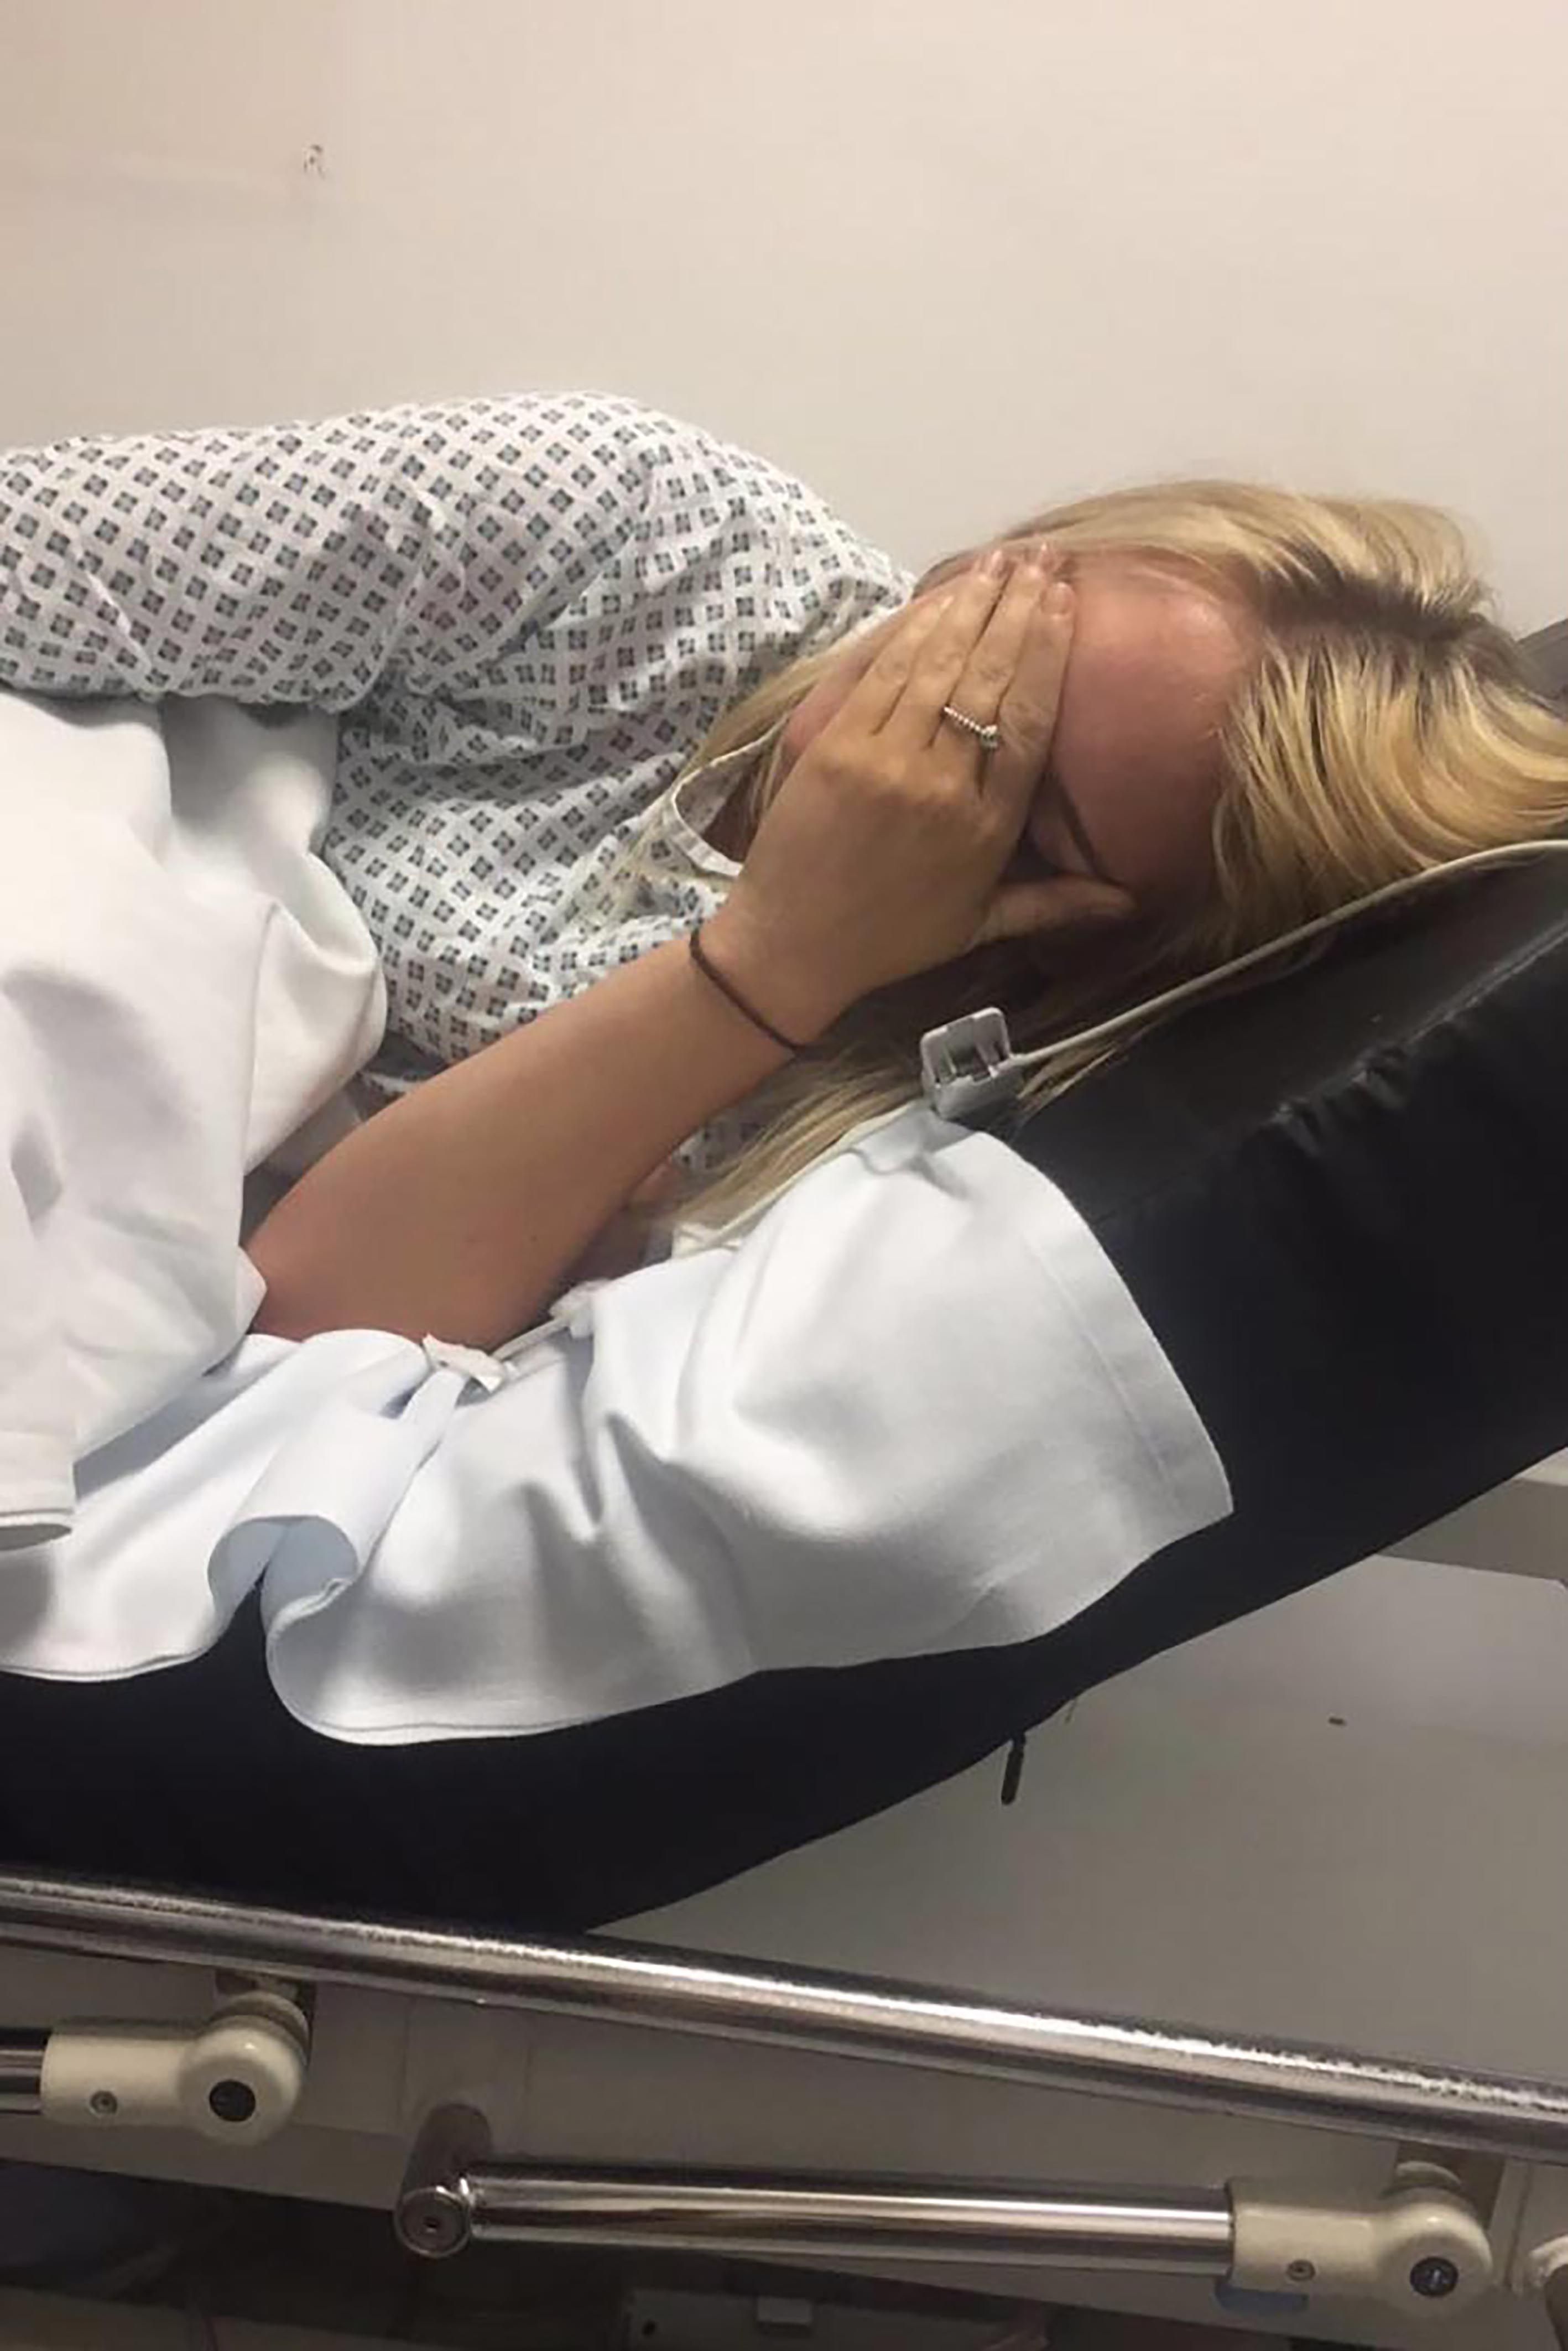 This Woman Got a Sex Toy Stuck In Her Butt Then Shared a Selfie From the Hospital After Getting It Removed